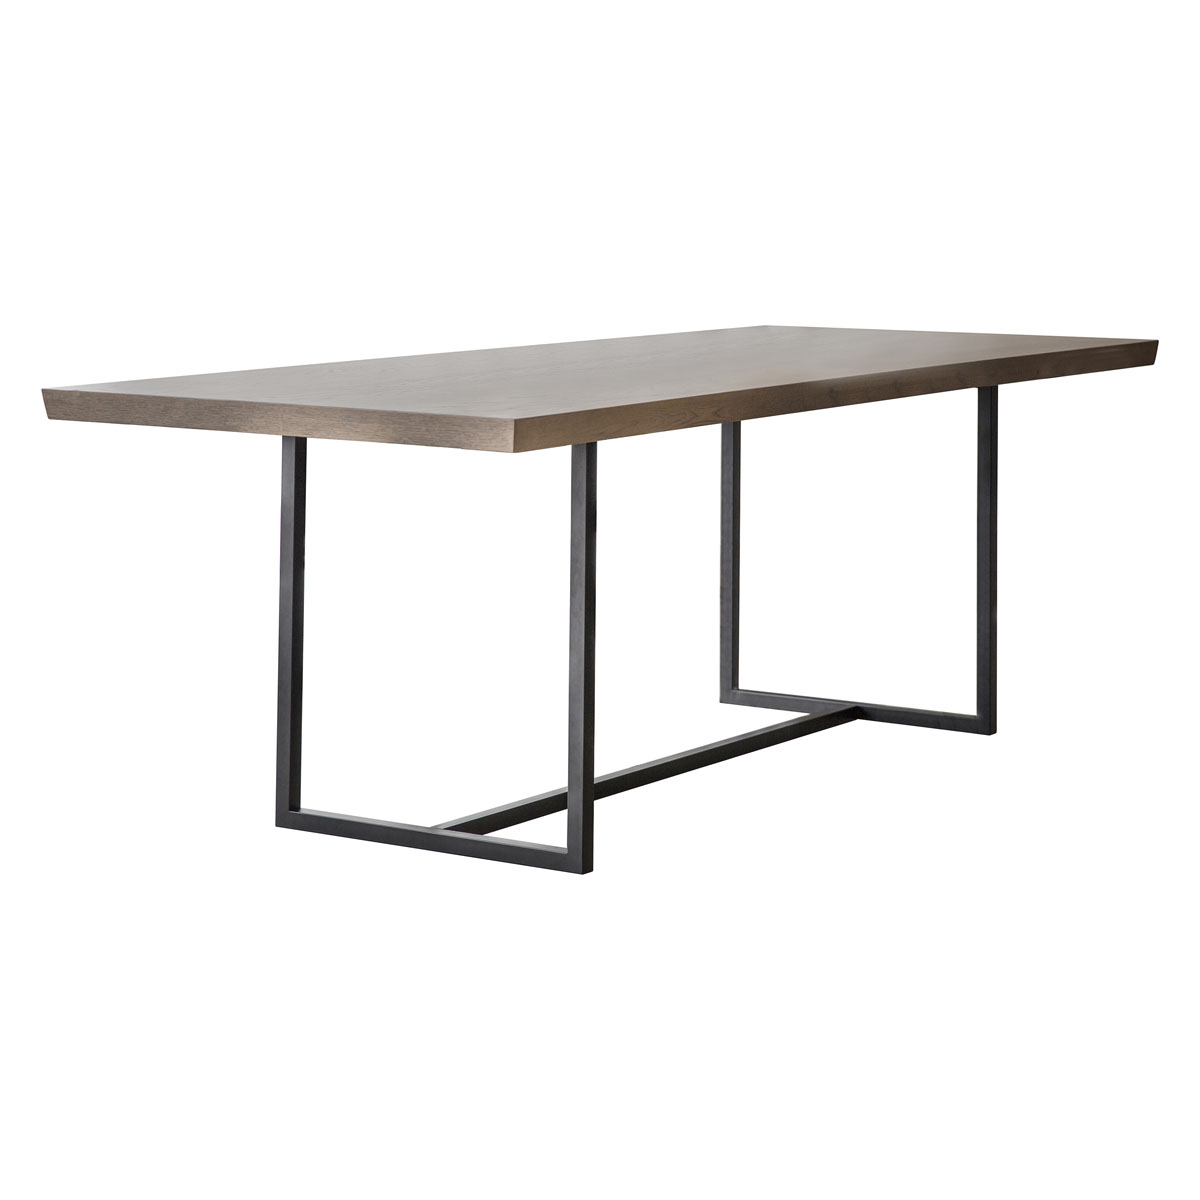 Forden Dining Table Grey 900x2200x750mm